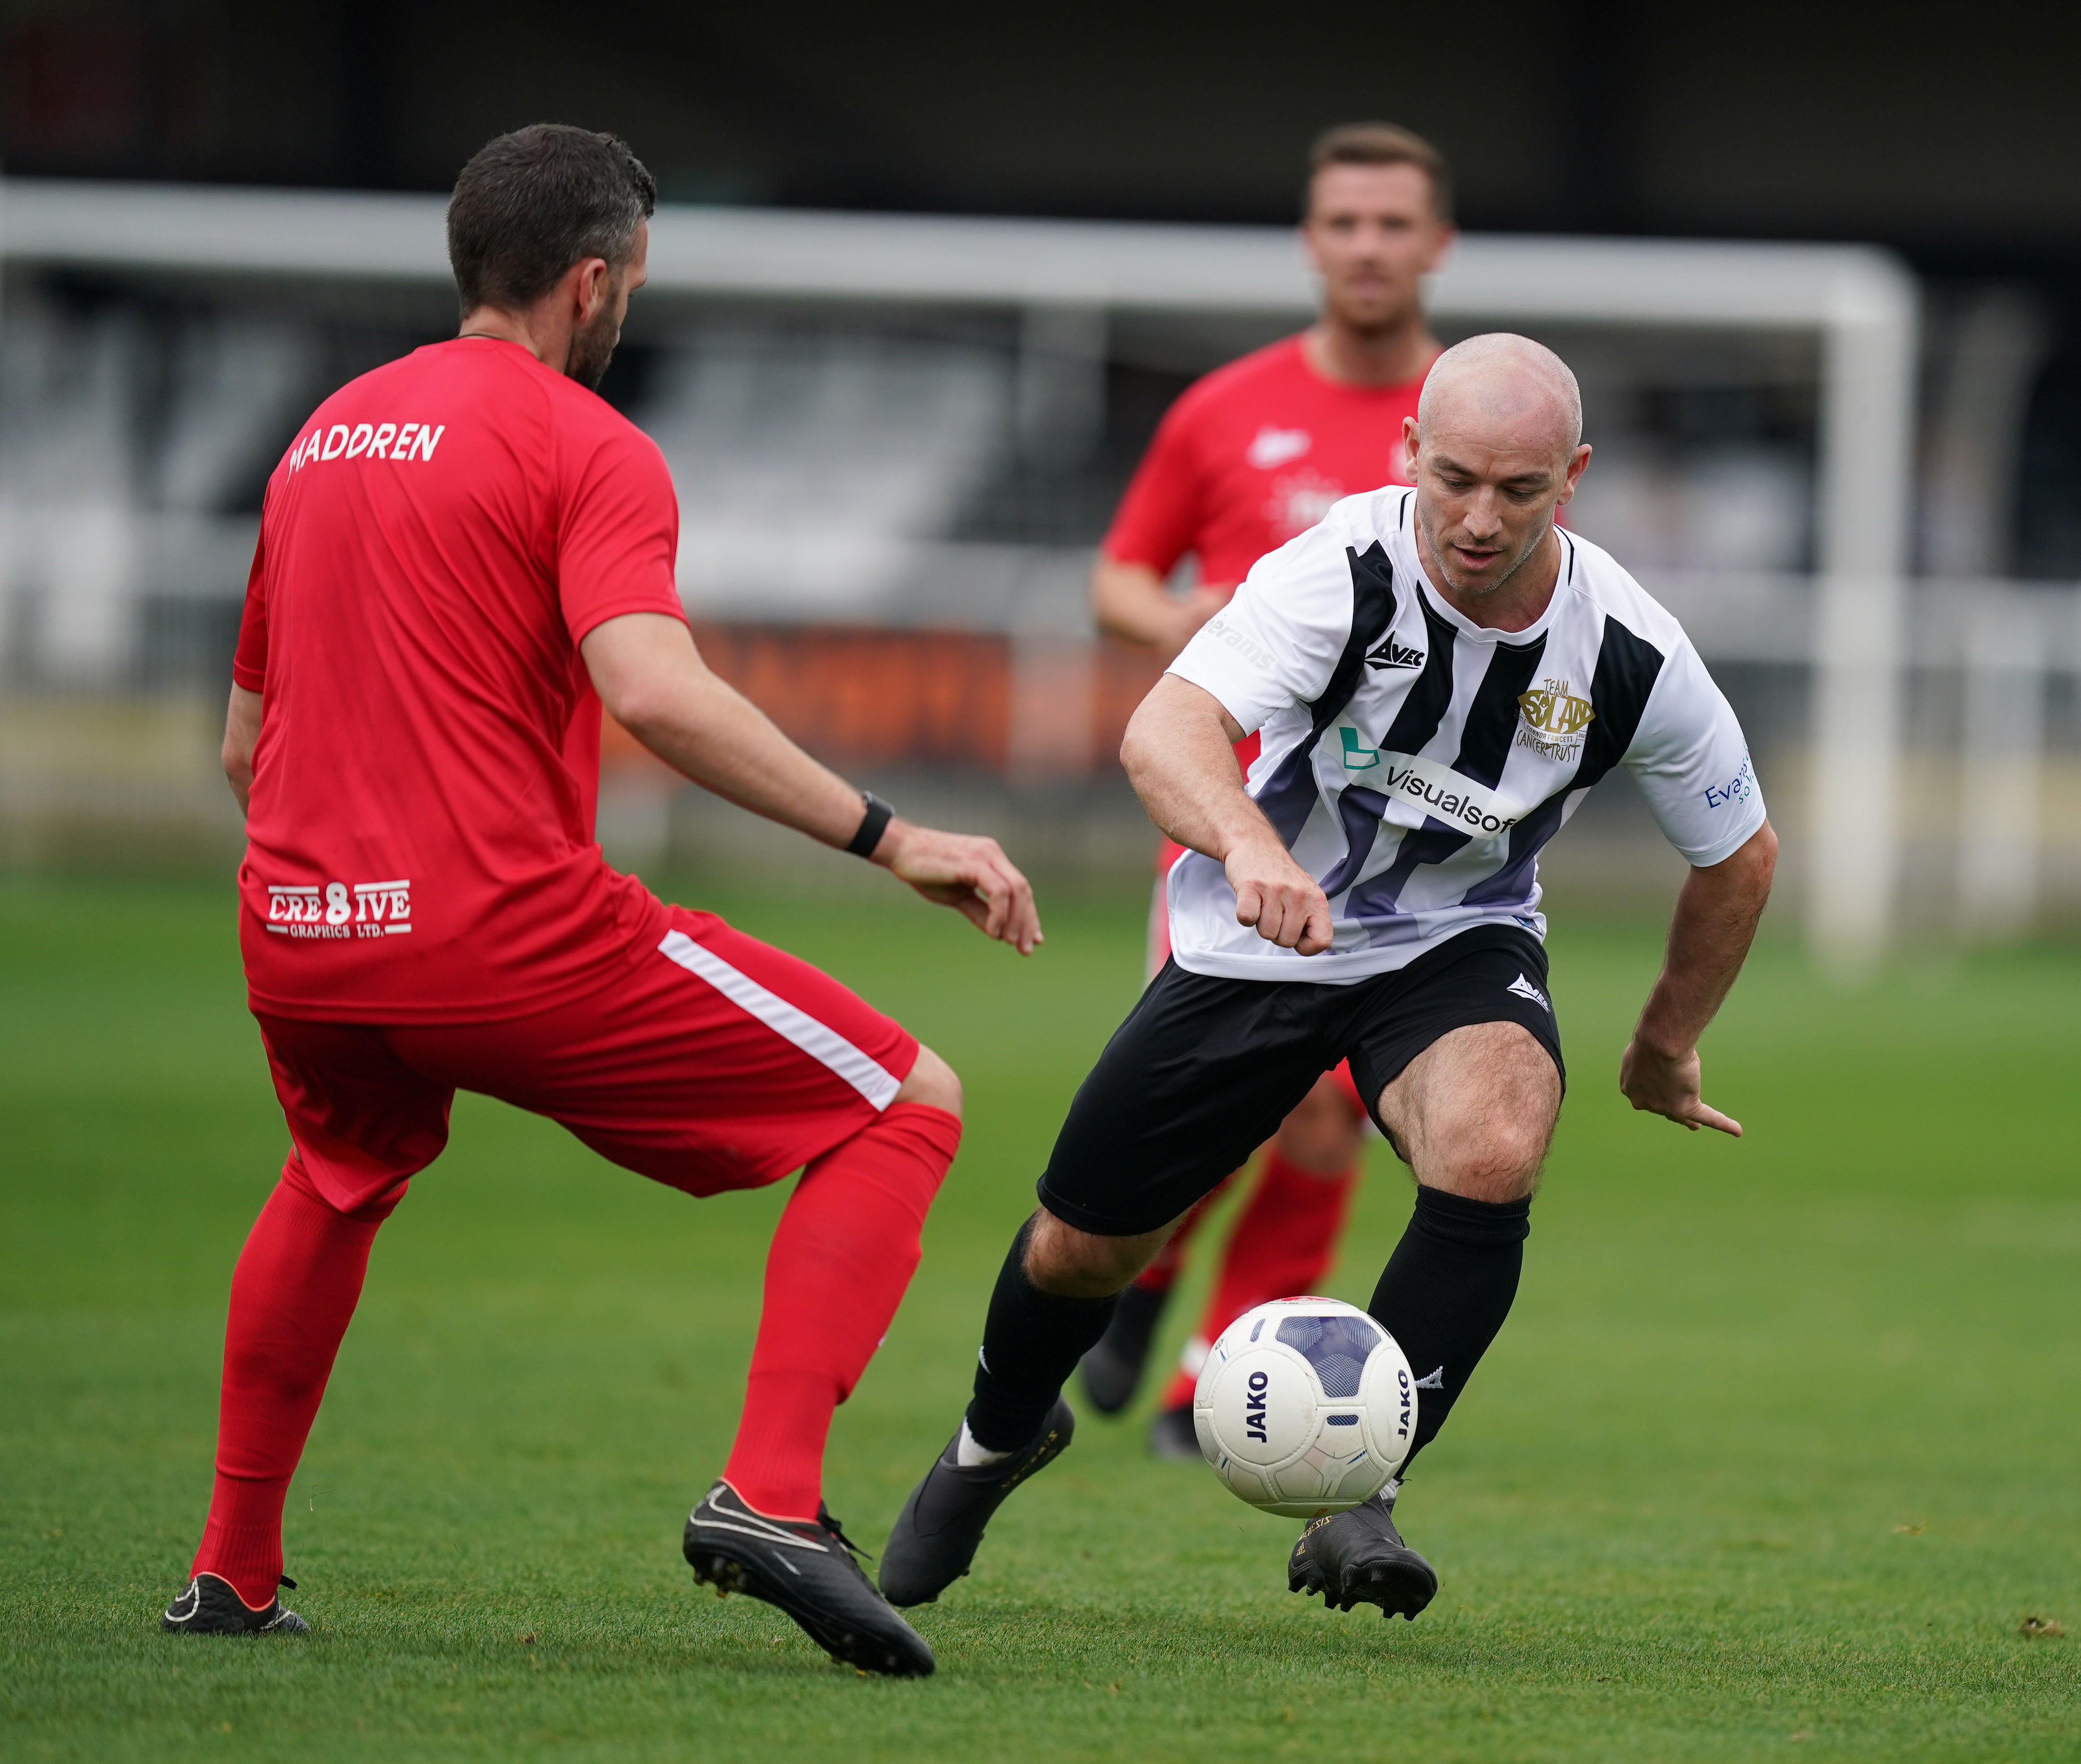 Heading was outlawed at a special charity match in Spennymoor (Mike Egerton/PA)